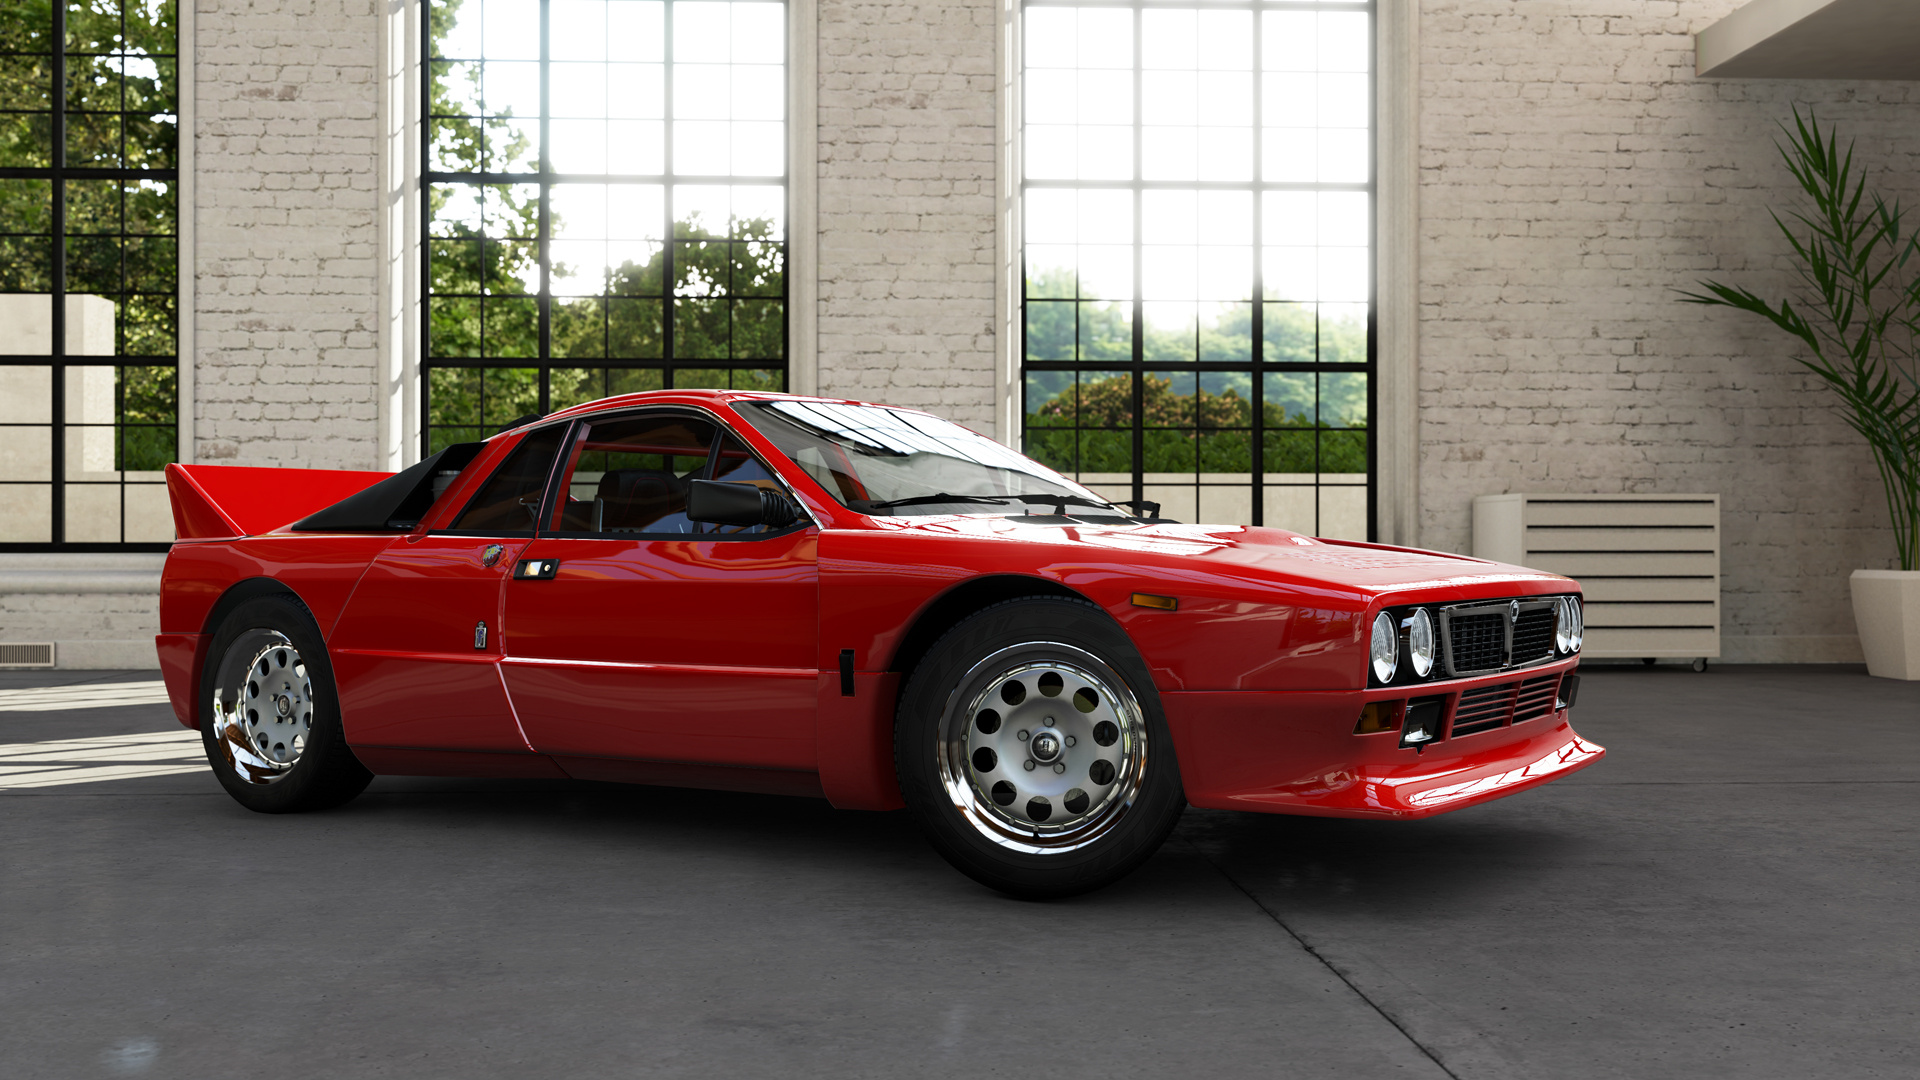 Lancia 037 wallpapers, High-quality backgrounds, 1920x1080 Full HD Desktop